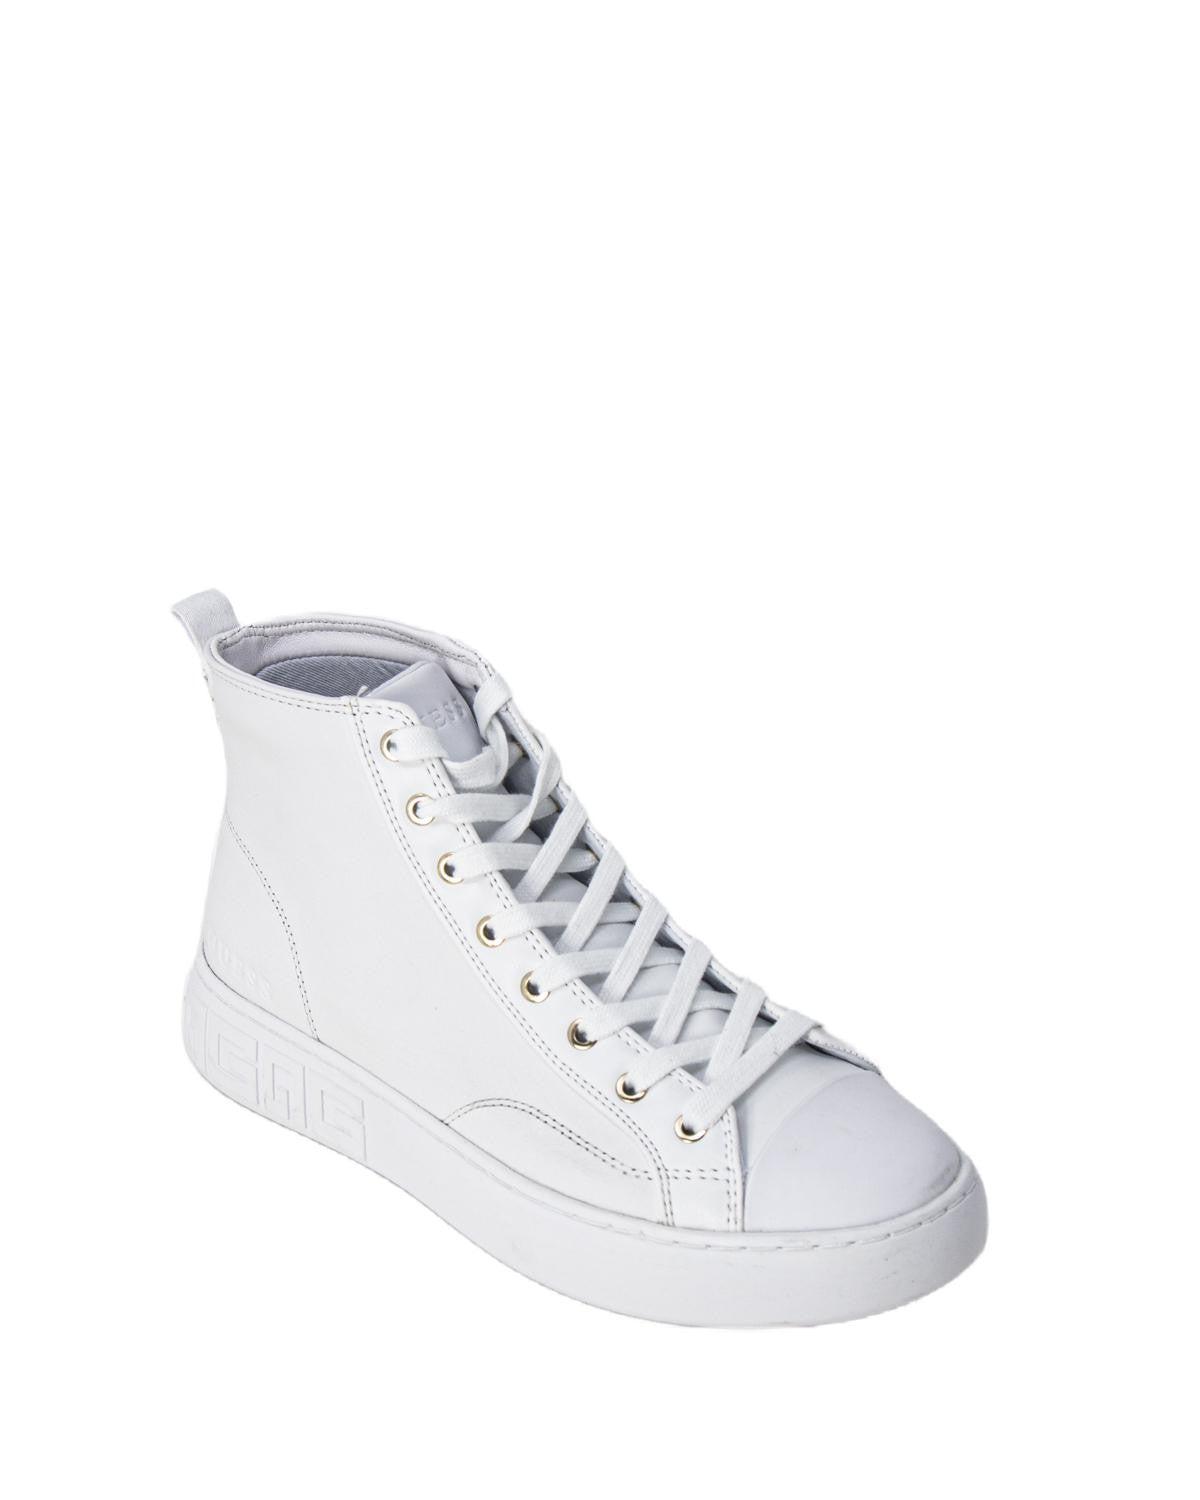 Guess White Sneakers - londonjetcentre.com